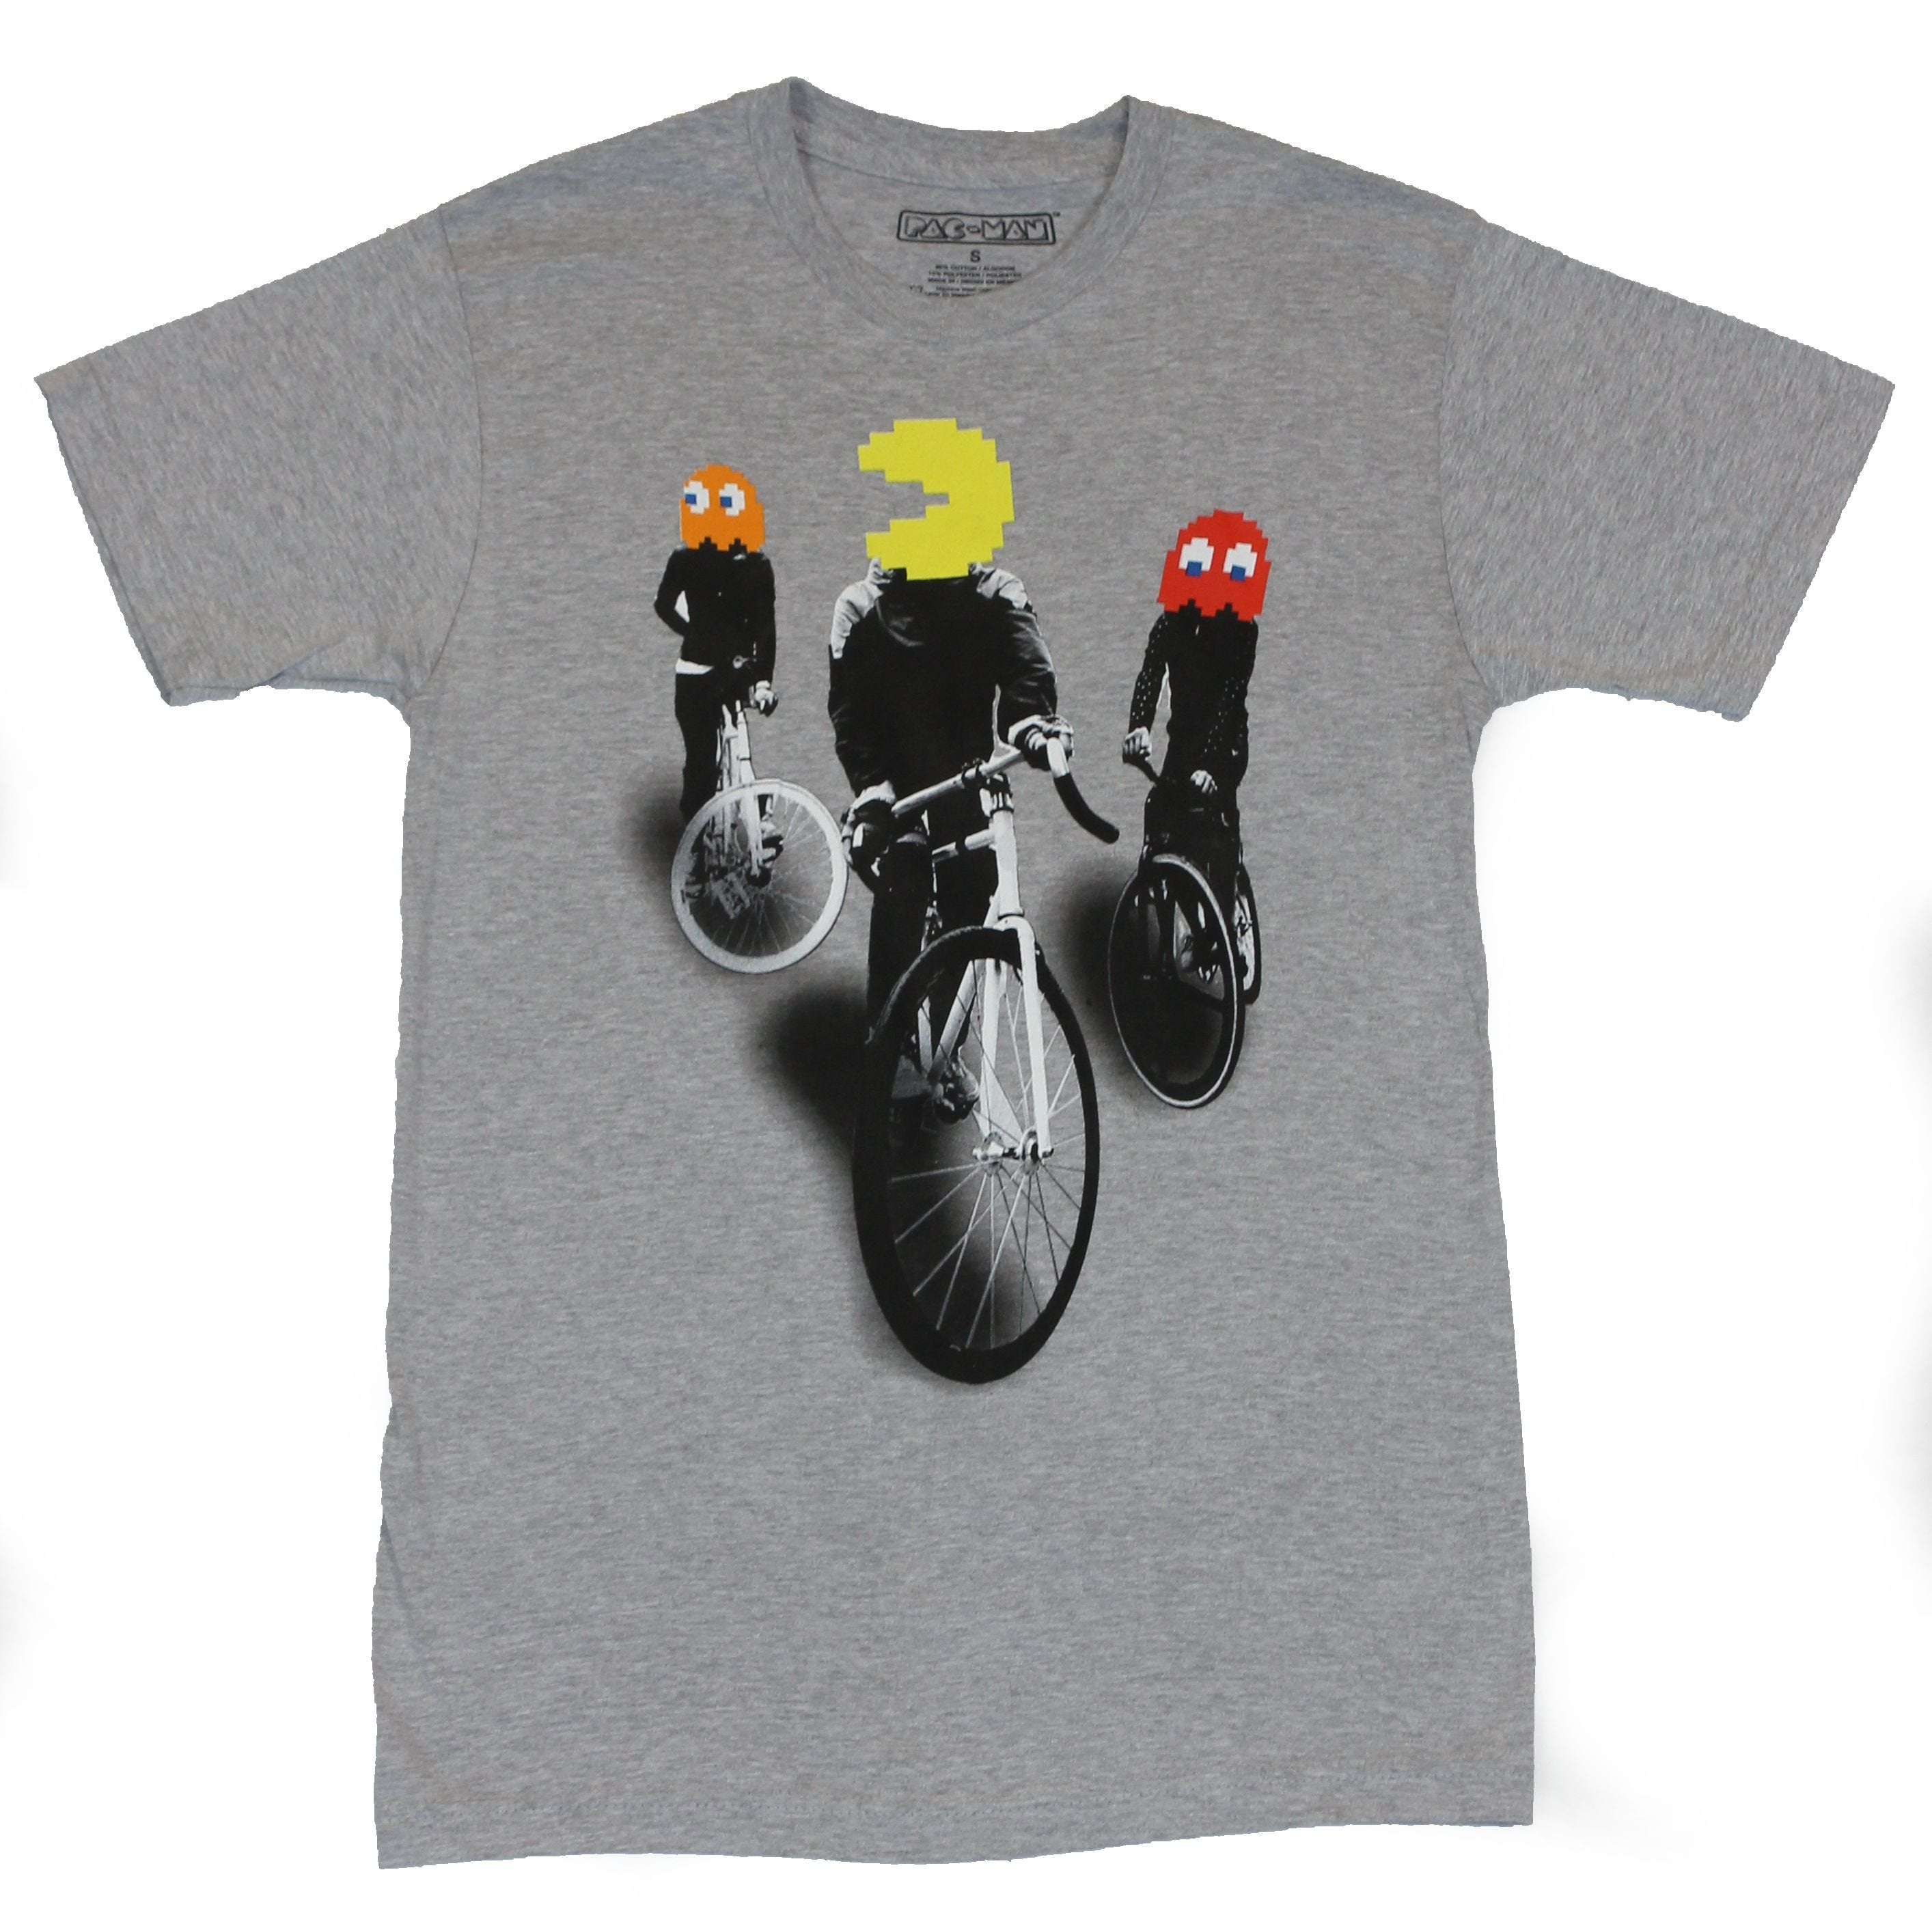 Pac-Man Mens T-Shirt - Pac Man Heads on Bicycle Riders Image